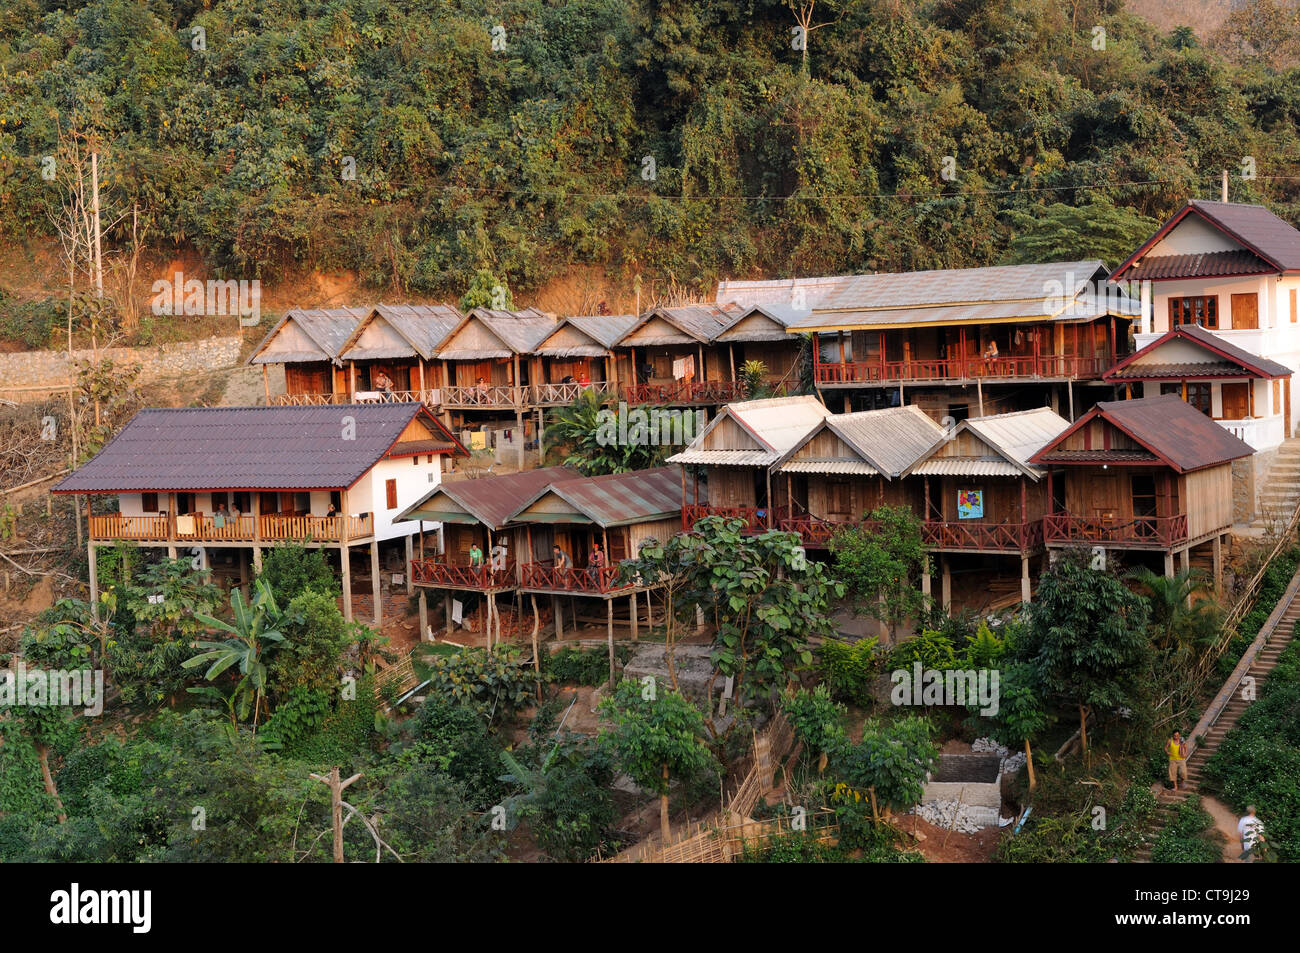 Hotel built in traditional style Nong Khiaw Village Laos Stock Photo